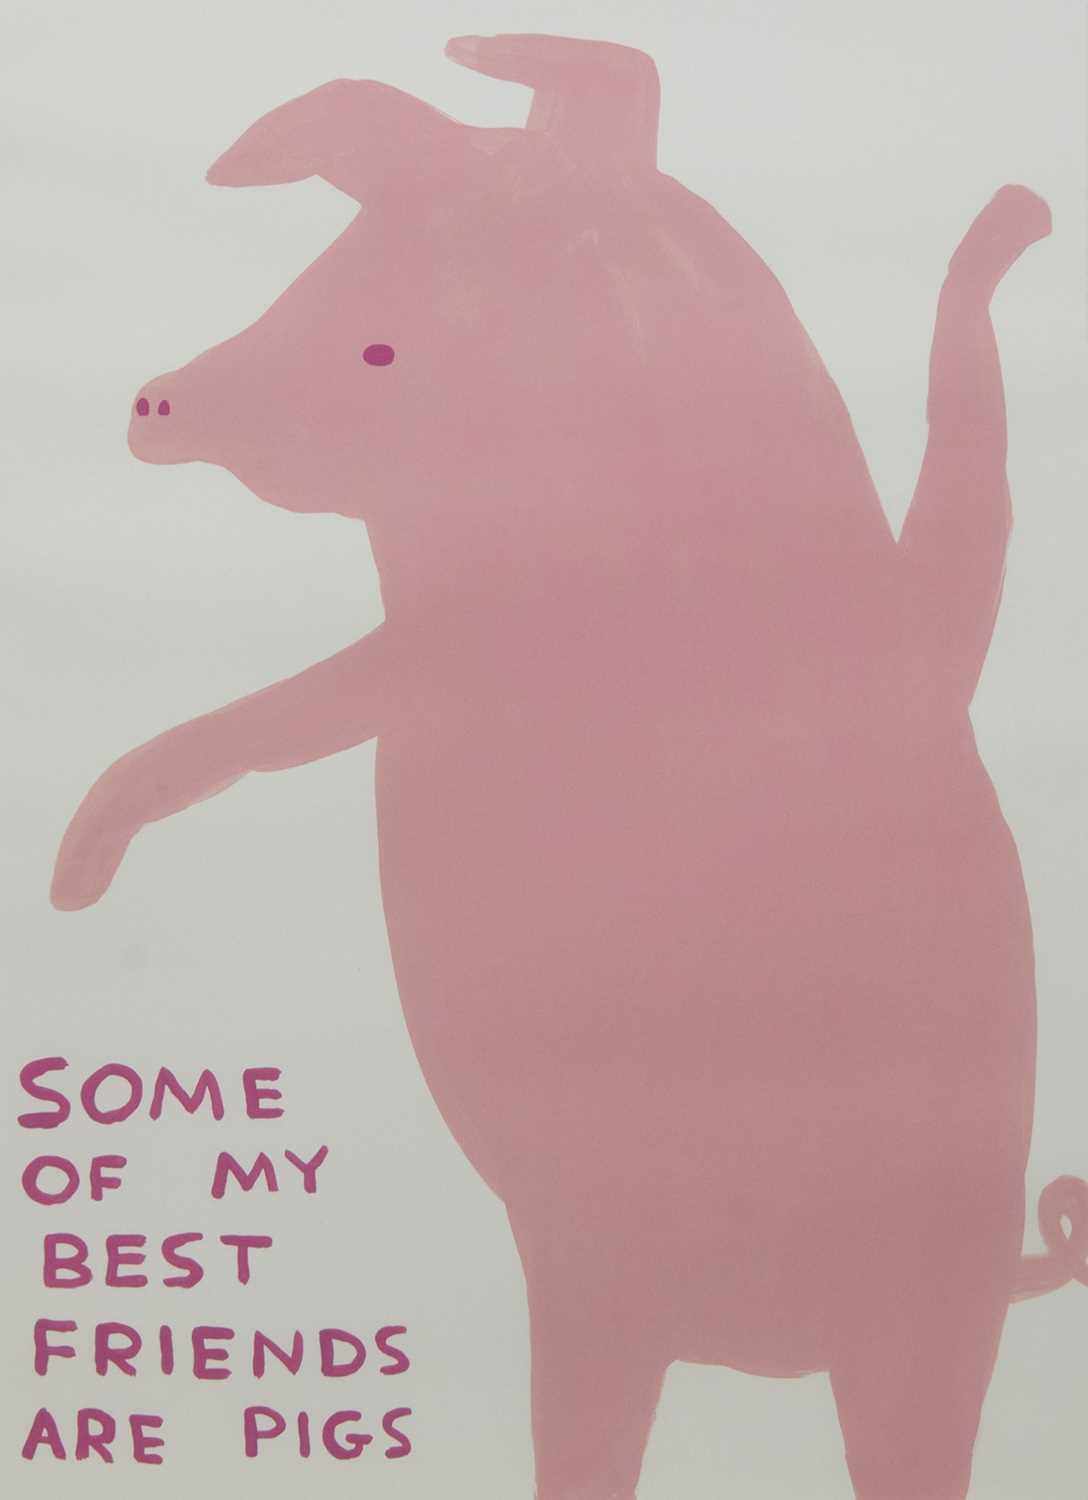 Lot 560 - SOME OF MY BEST FRIENDS ARE PIGS, A LITHOGRAPH BY DAVID SHRIGLEY